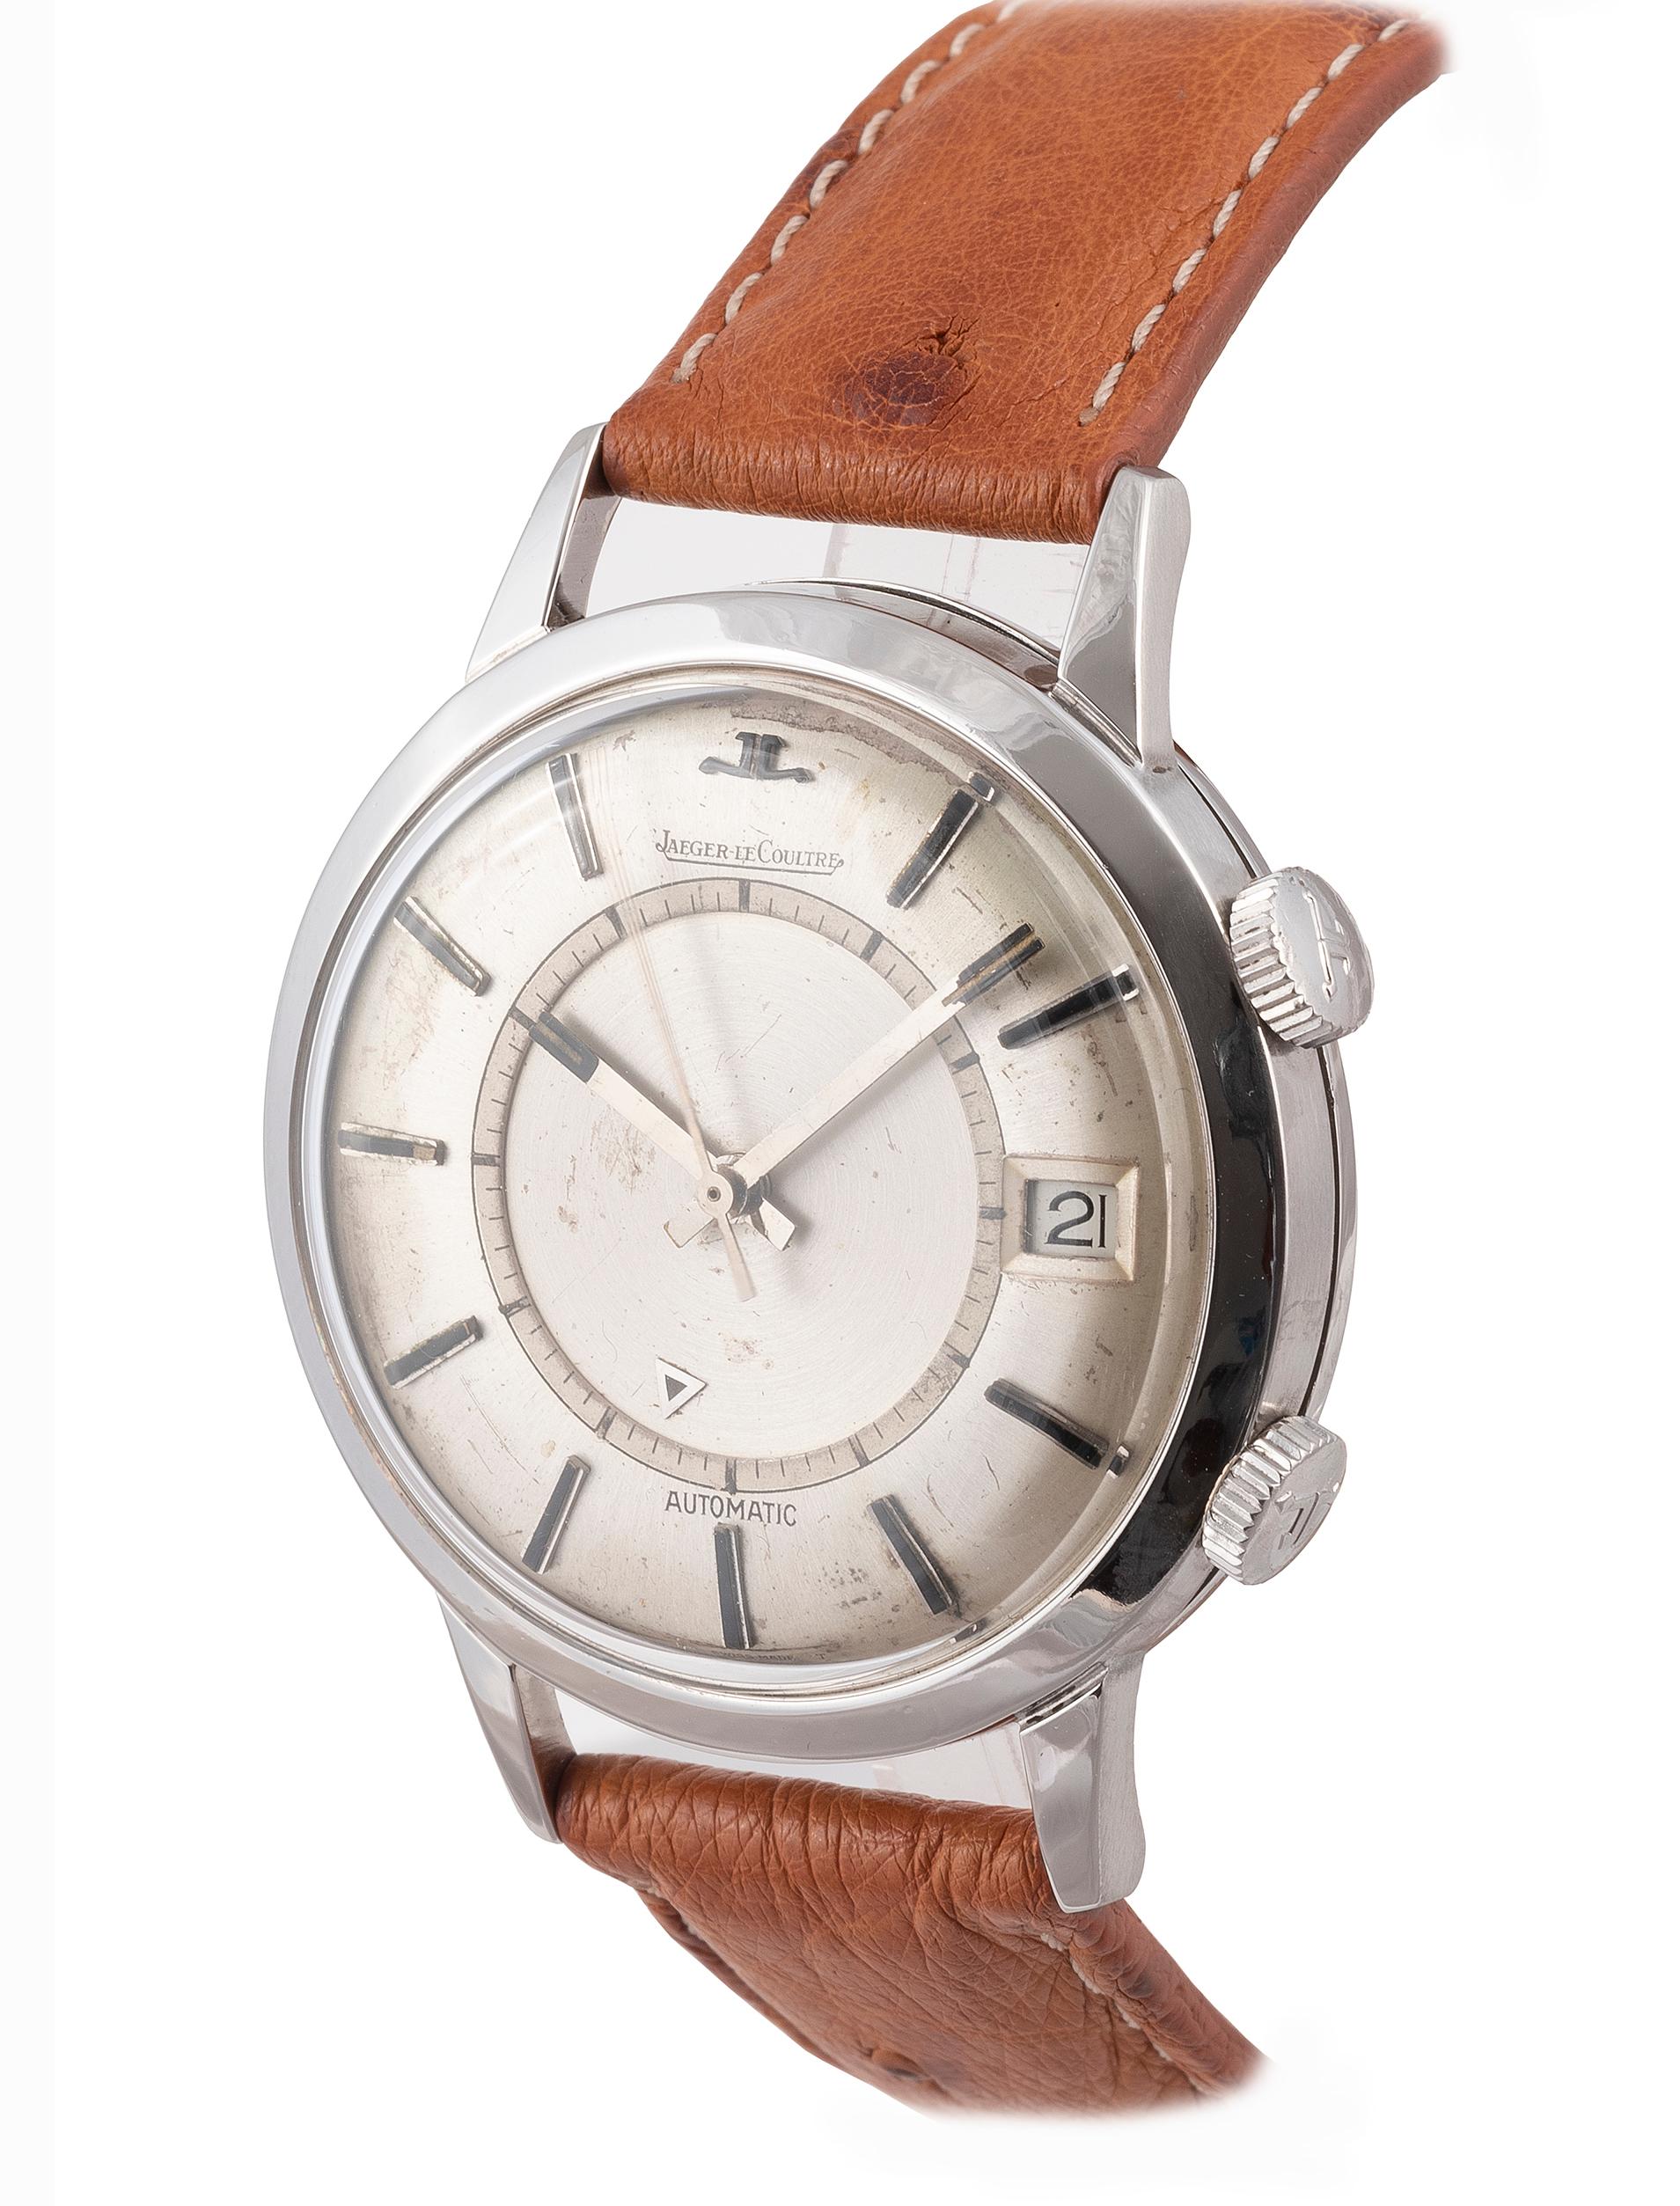 Model Memovox
Reference E855
Year 1968
Movement No.2028306
Calibre  K825
Material Stainless steel
Bracelet Leather
Buckle: Jaeger Lecoultre steel
Diameter 37 mm
Signature Dial, case, movement
Fine stainless steel self winding alarm wristwatch with